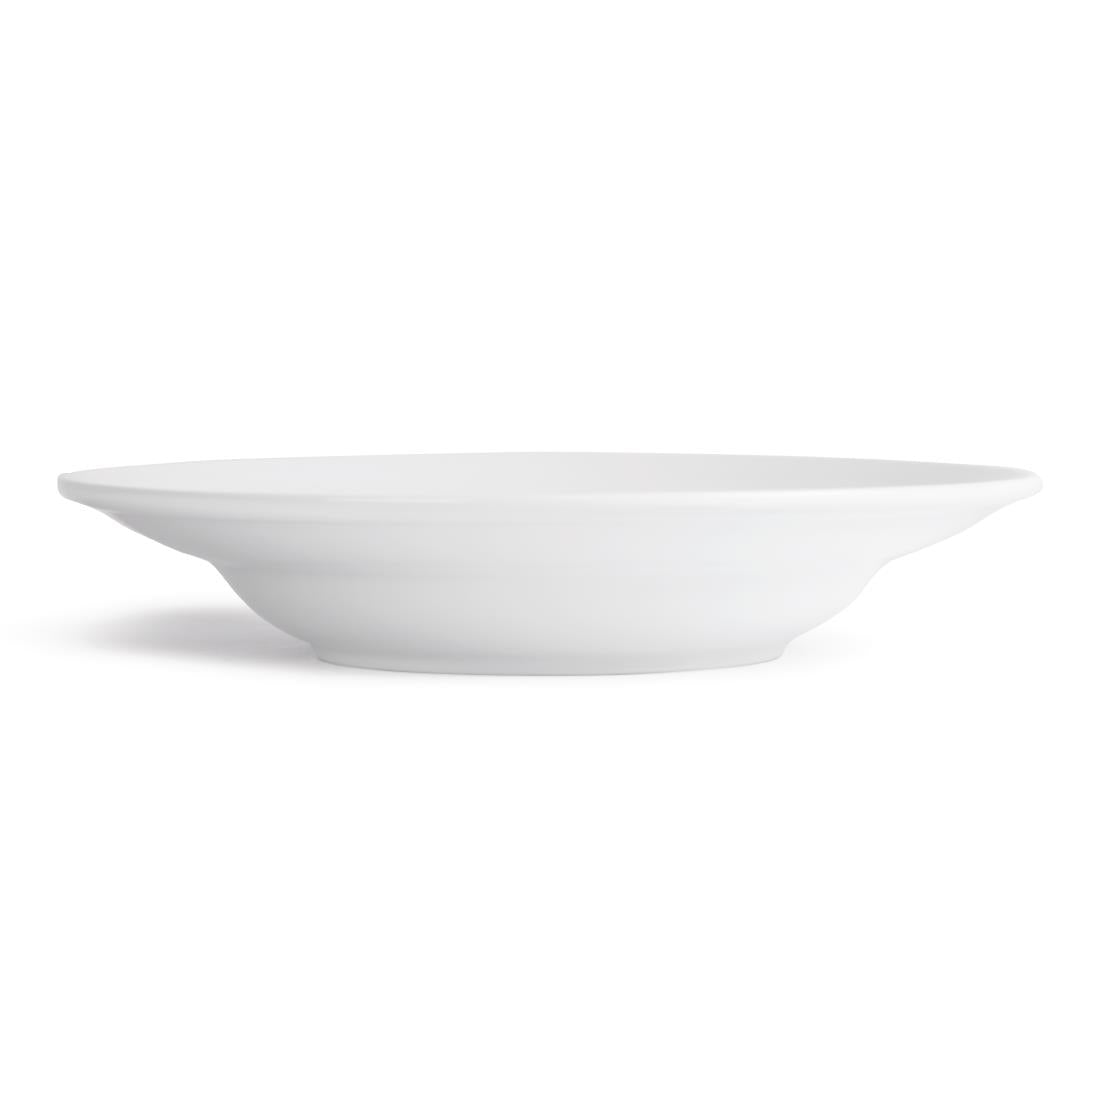 CG058 Royal Porcelain Classic White Pasta Plates 300mm (Pack of 12)